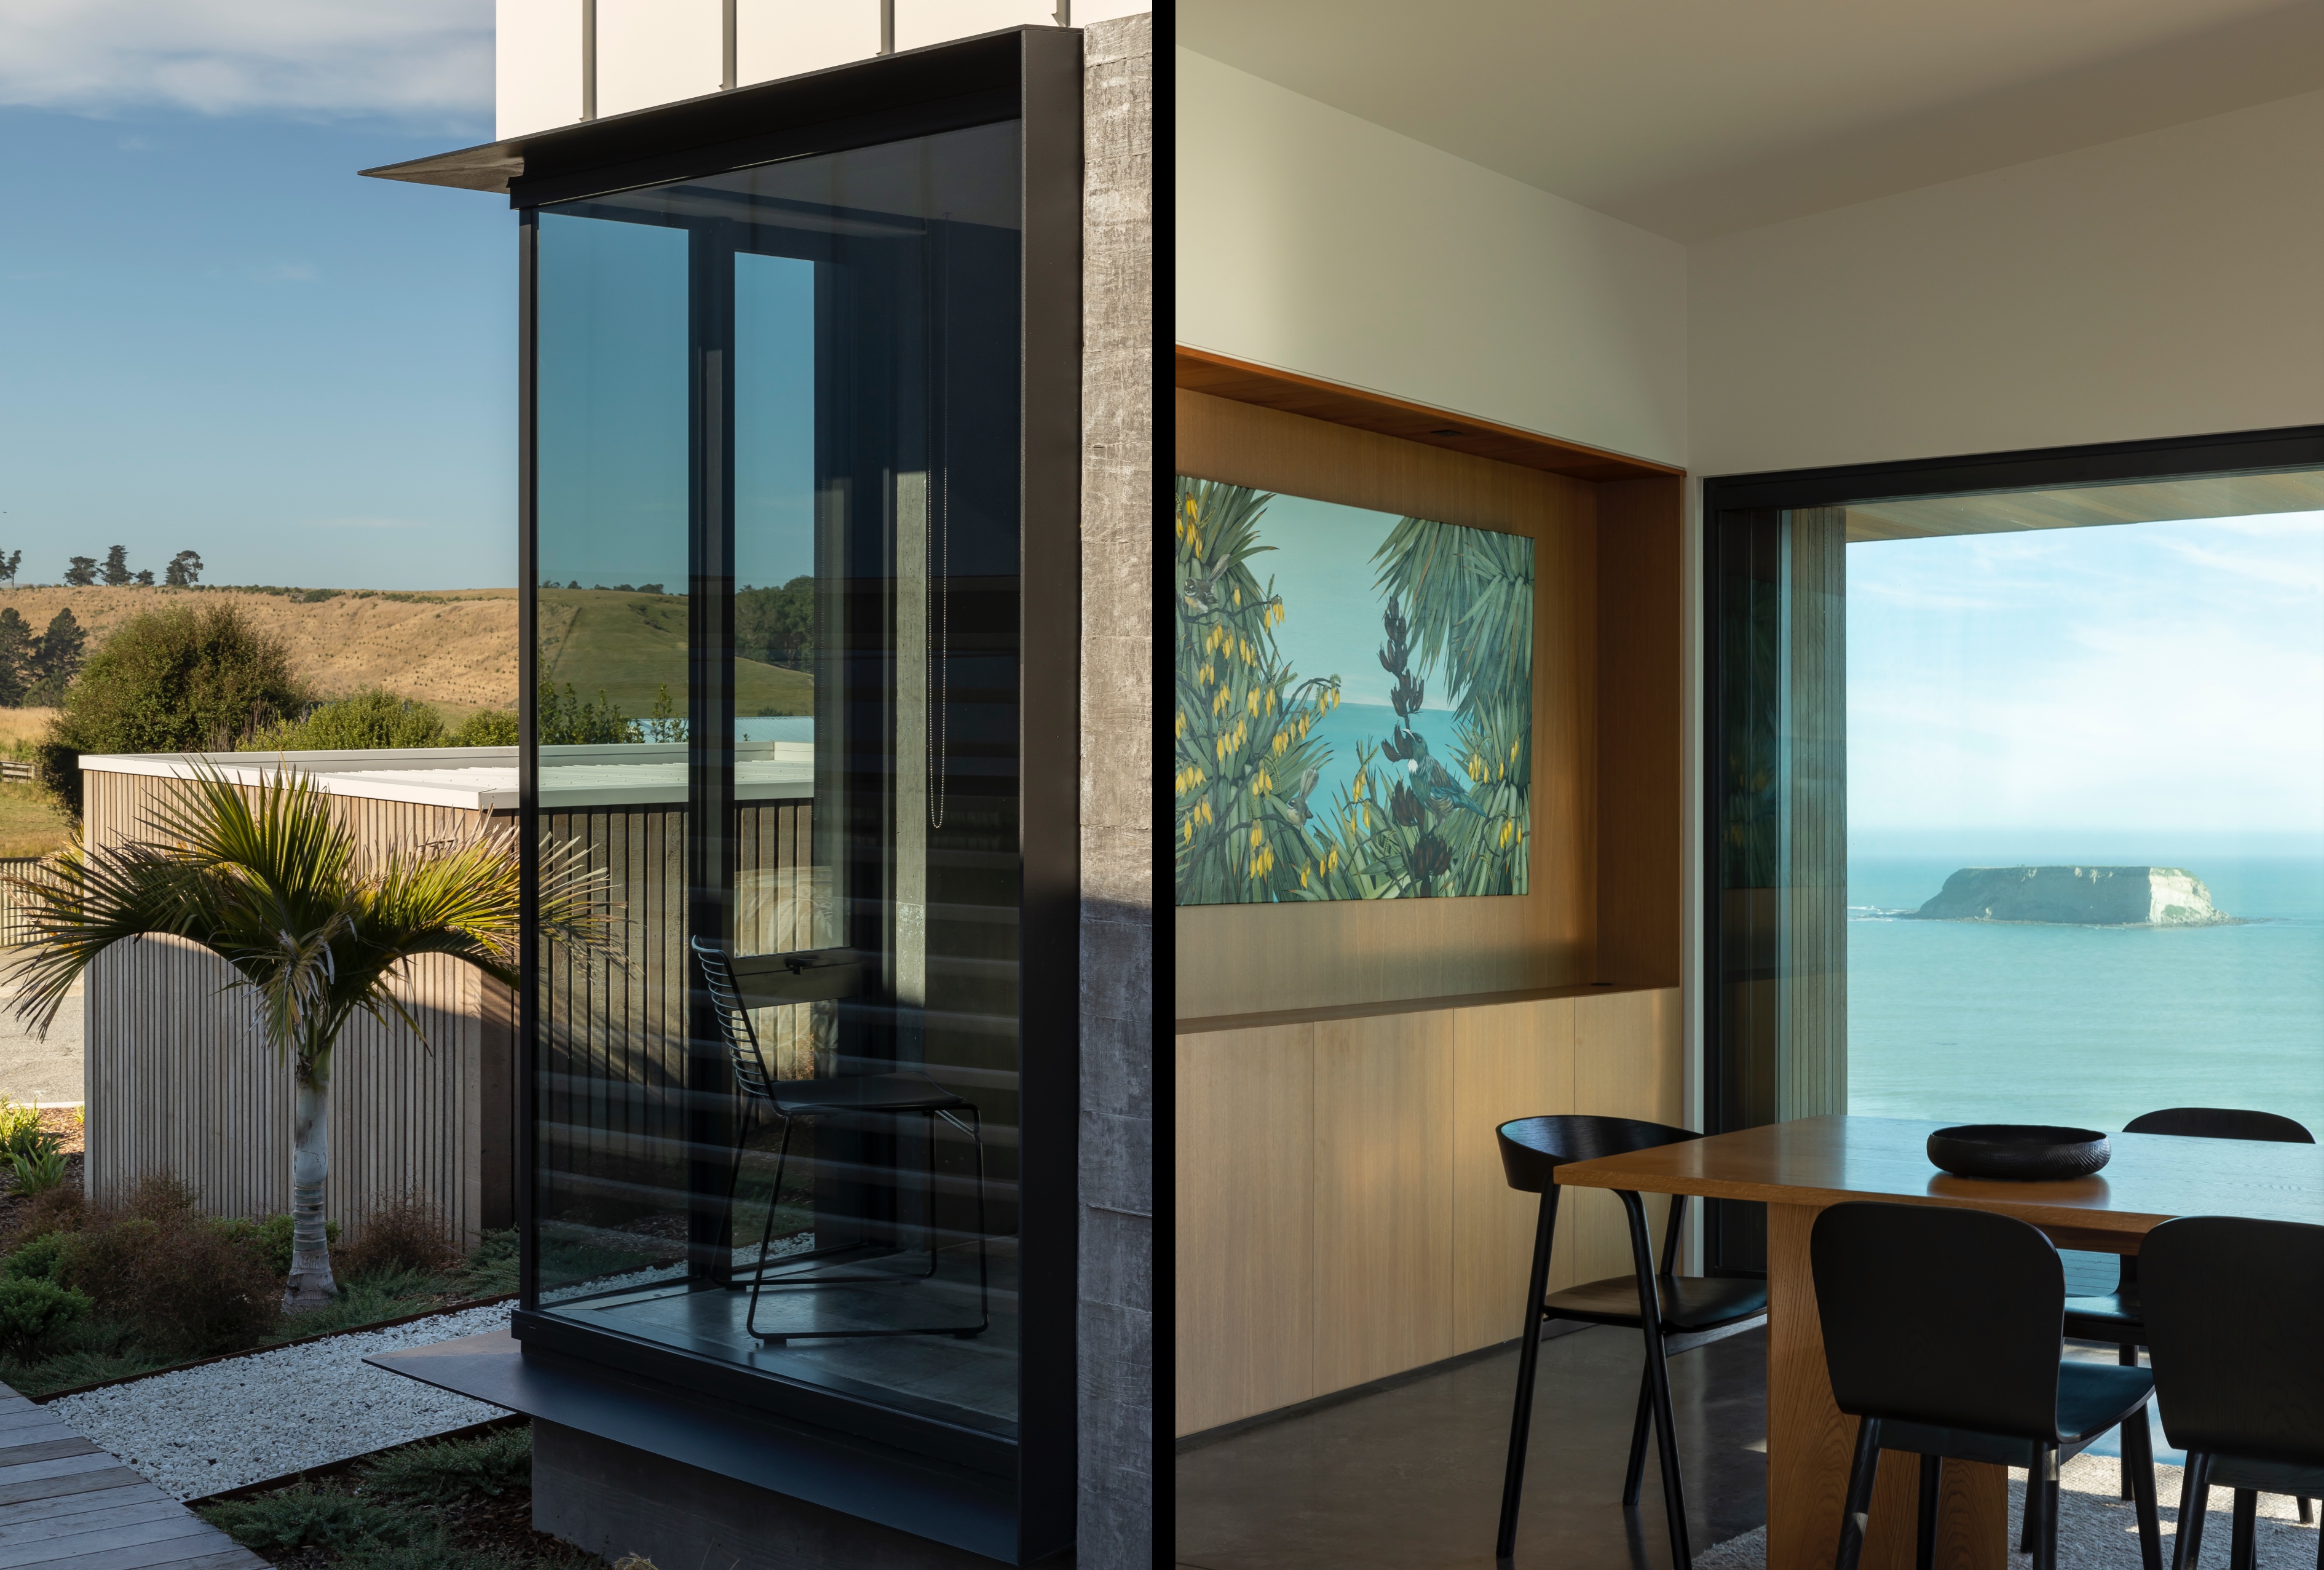 Left side exterior of glass corner with hills in background. Right side interior of table and chairs with ocean view.